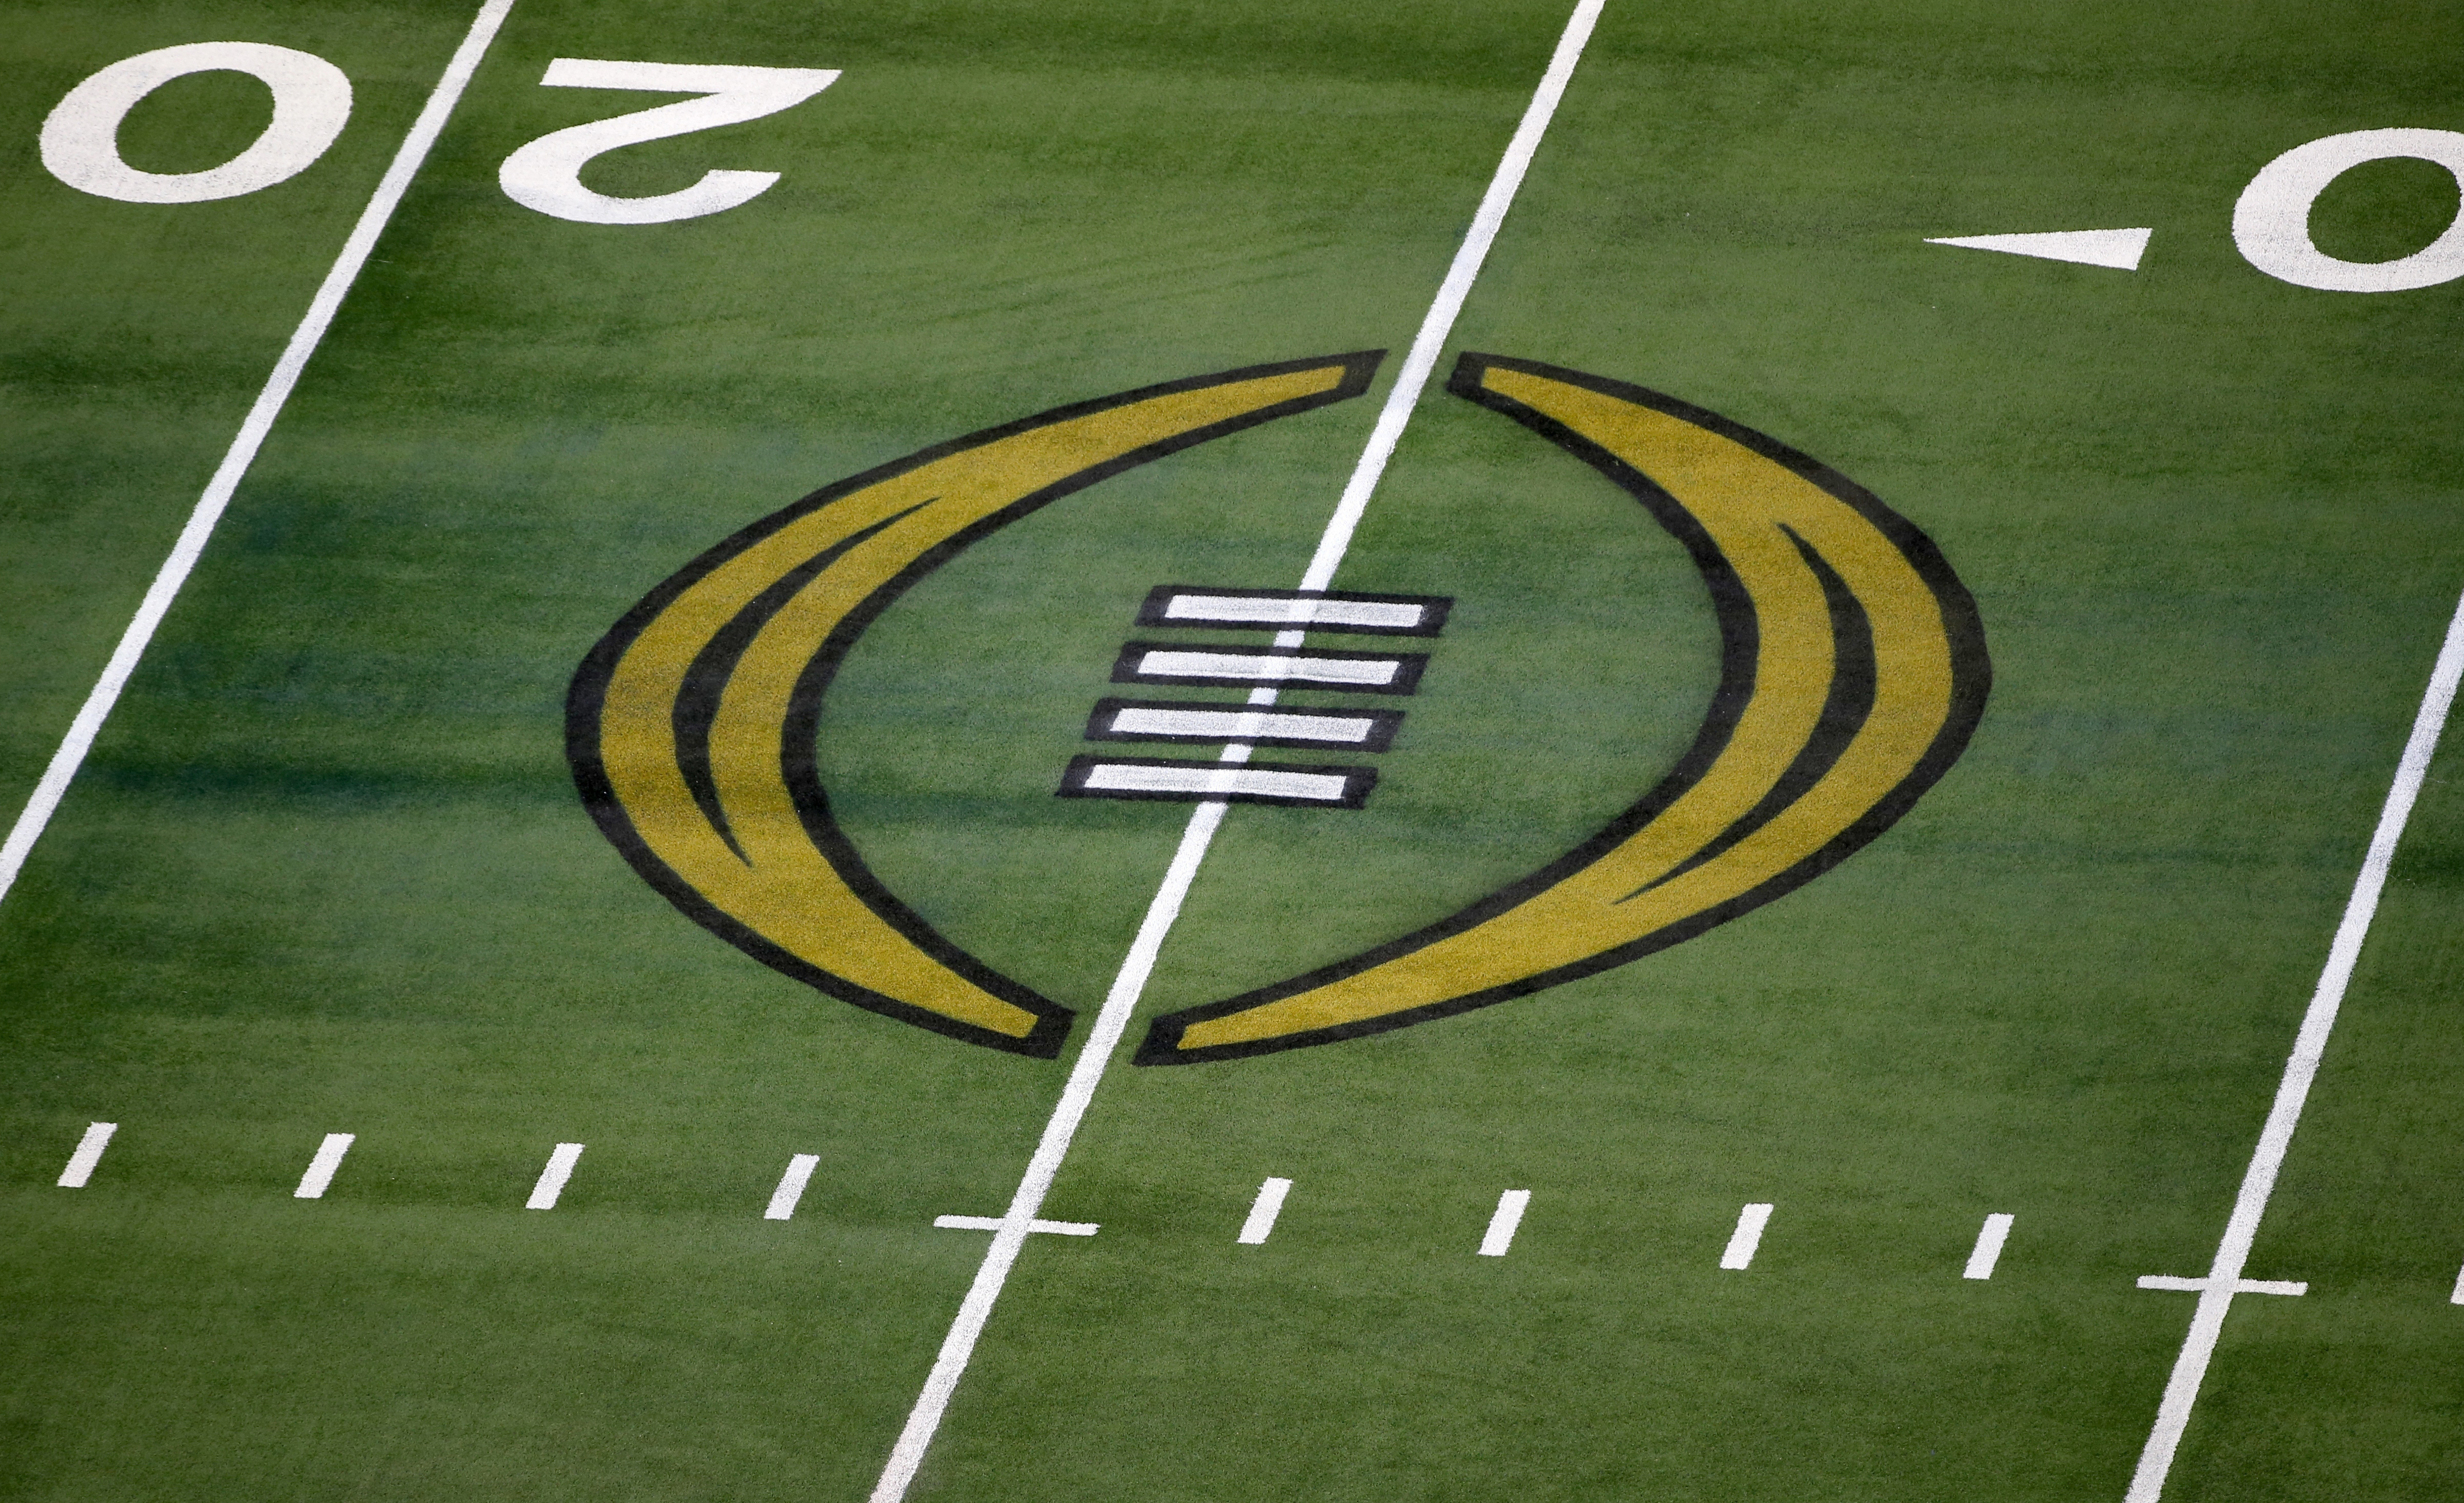 Conference championships critical for College Football Playoff in